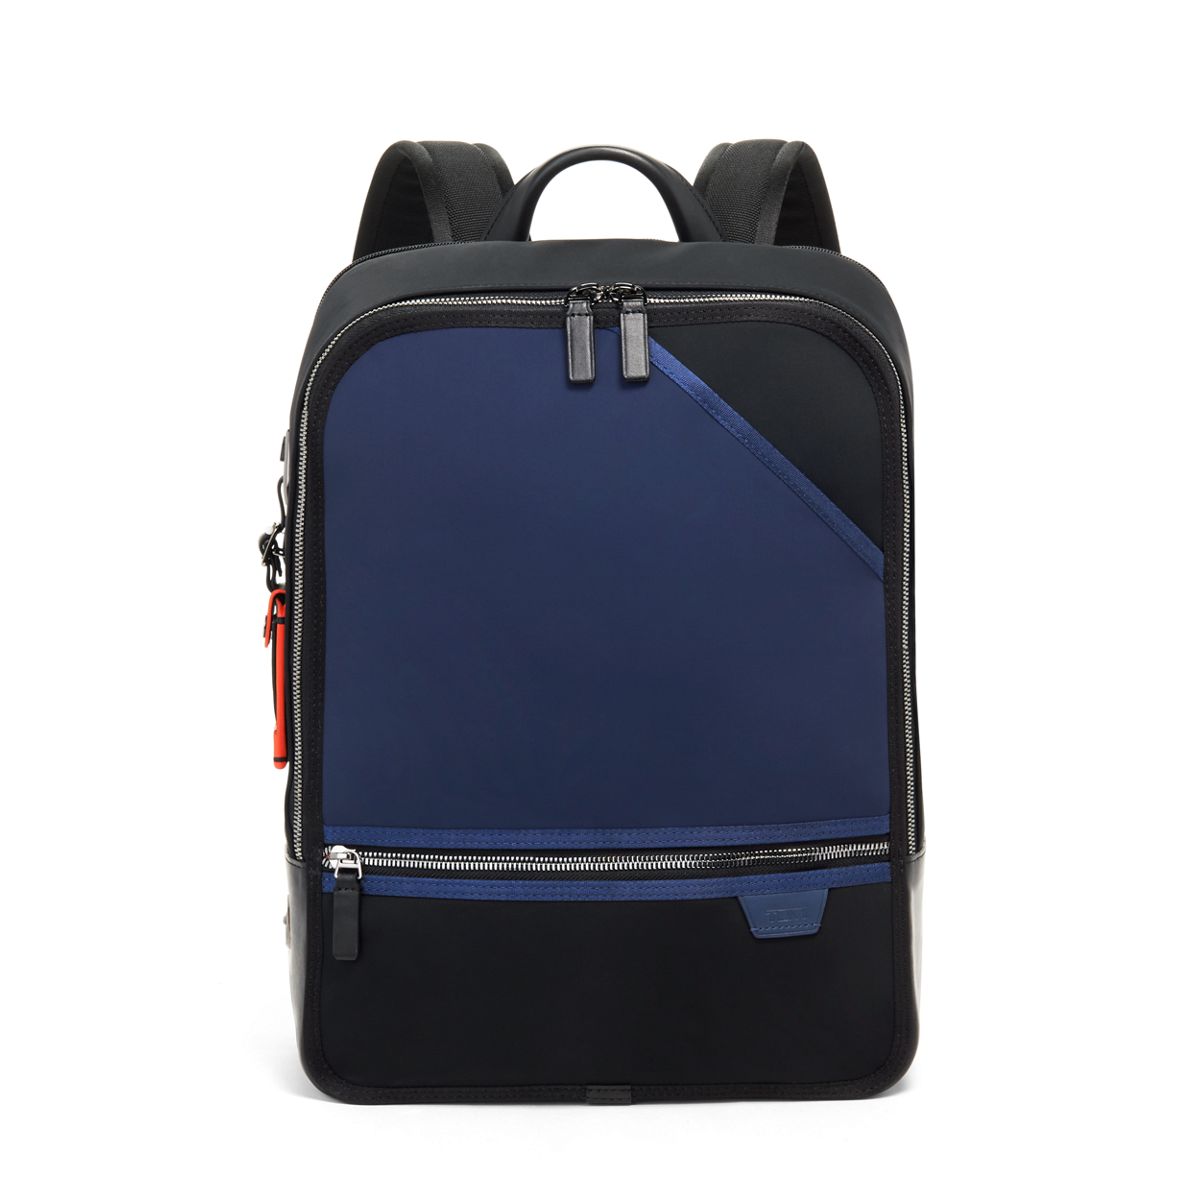 Harrison William Backpack in Midnight Navy